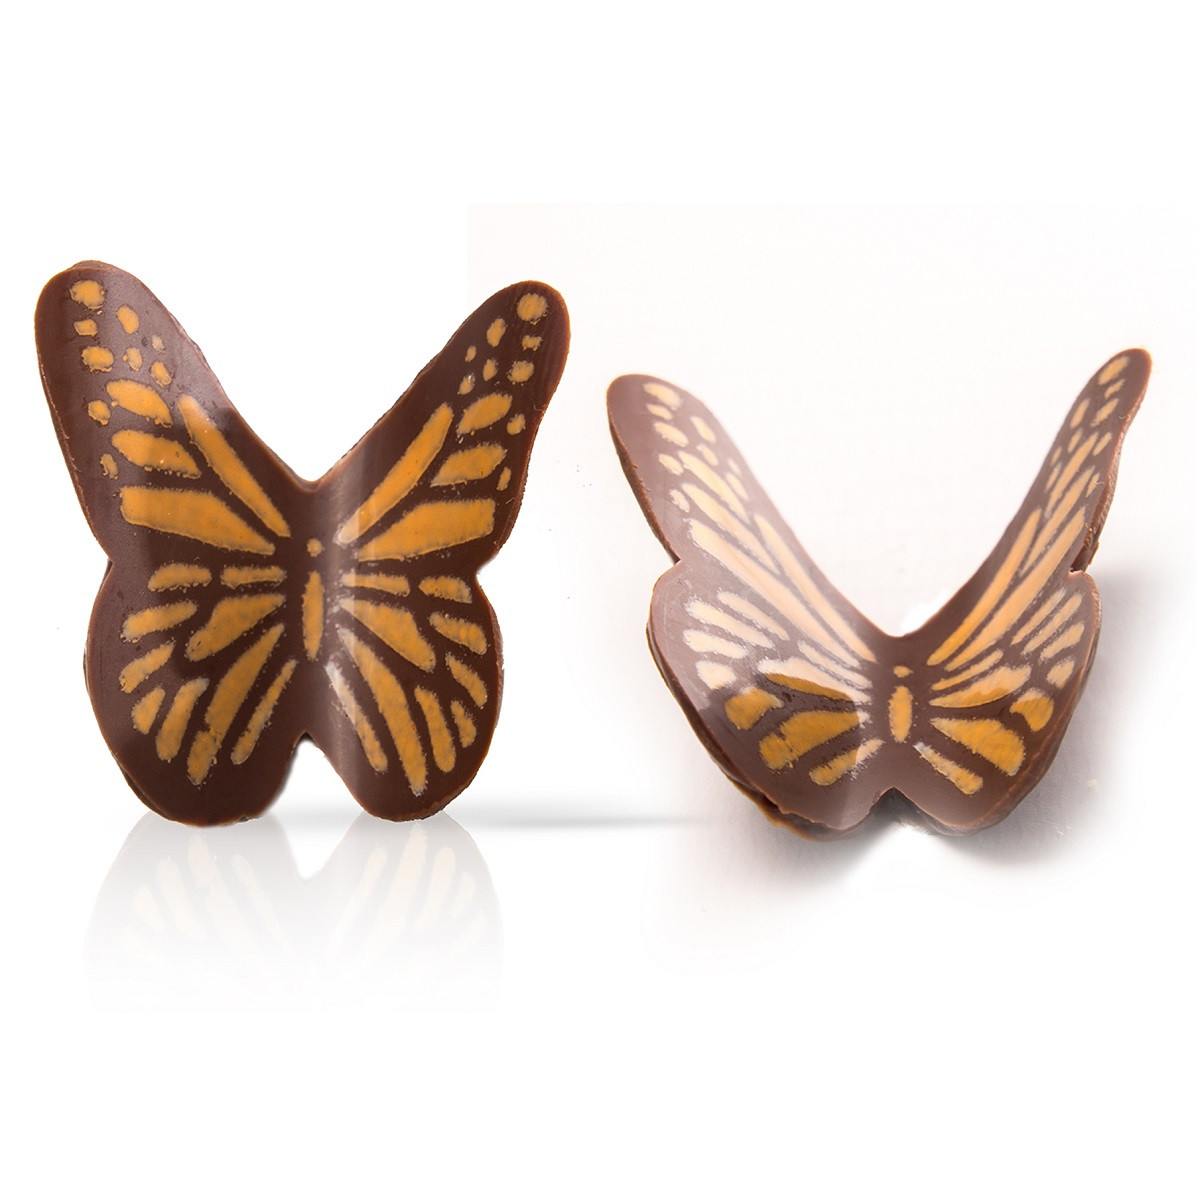 Dobla Chocolate Decoration Butterfly (120 pieces)